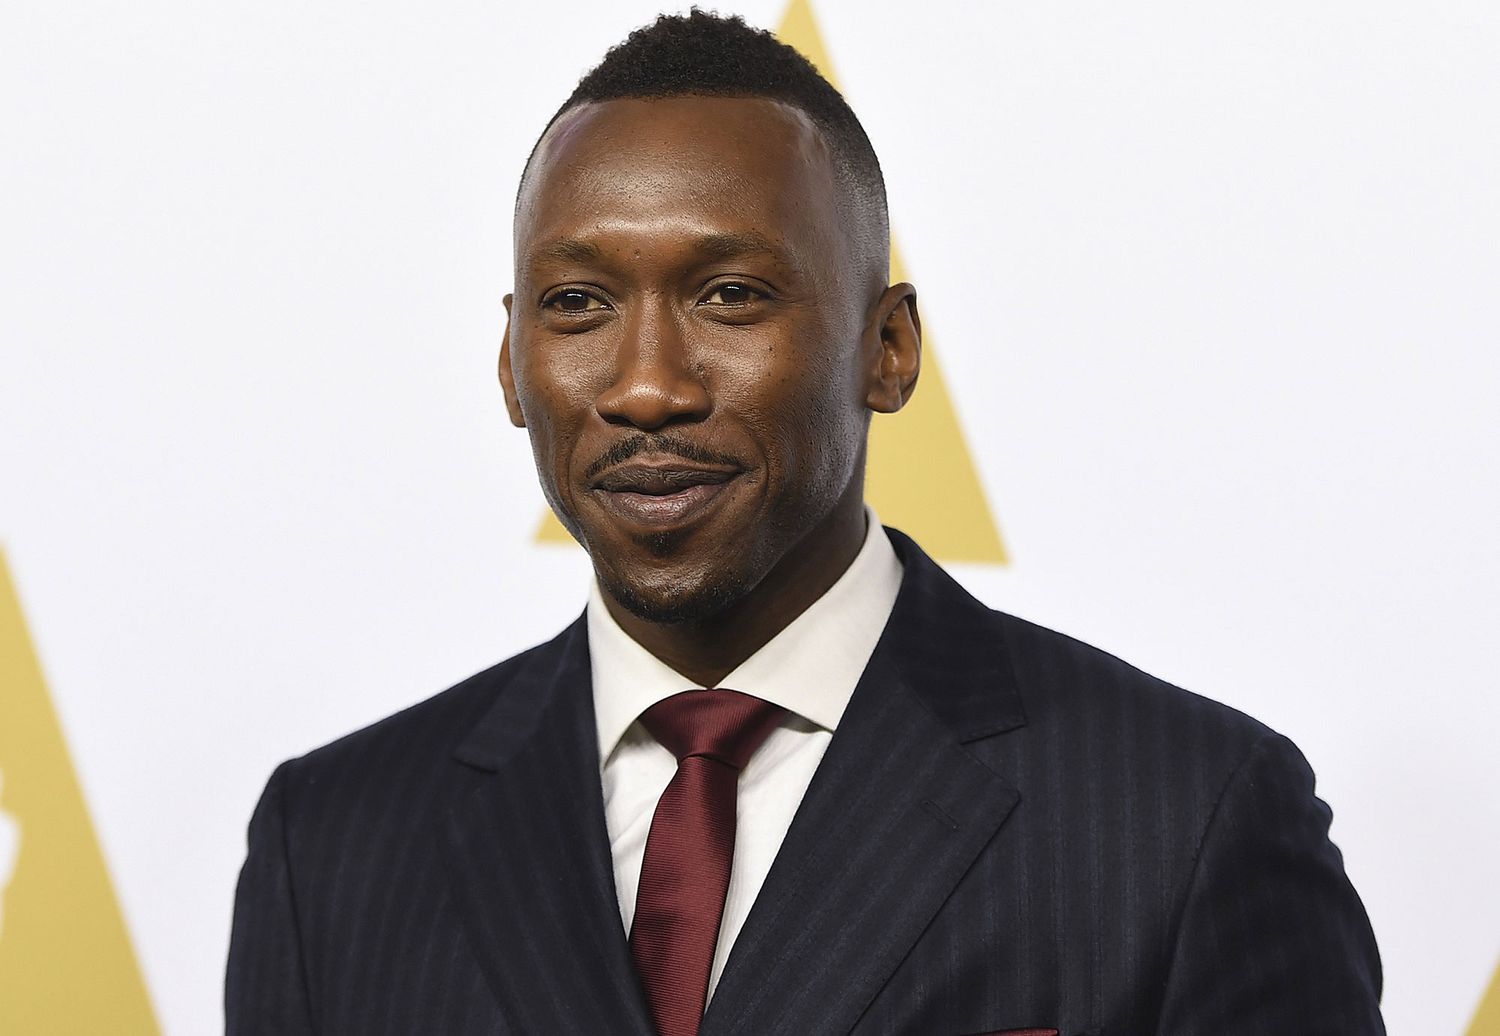 Mahershala Ali arrives at the 89th Academy Awards Nominees Luncheon at The Beverly Hilton Hotel on Monday, Feb. 6, 2017, in Beverly Hills, Calif. (Photo by Jordan Strauss/Invision/AP)